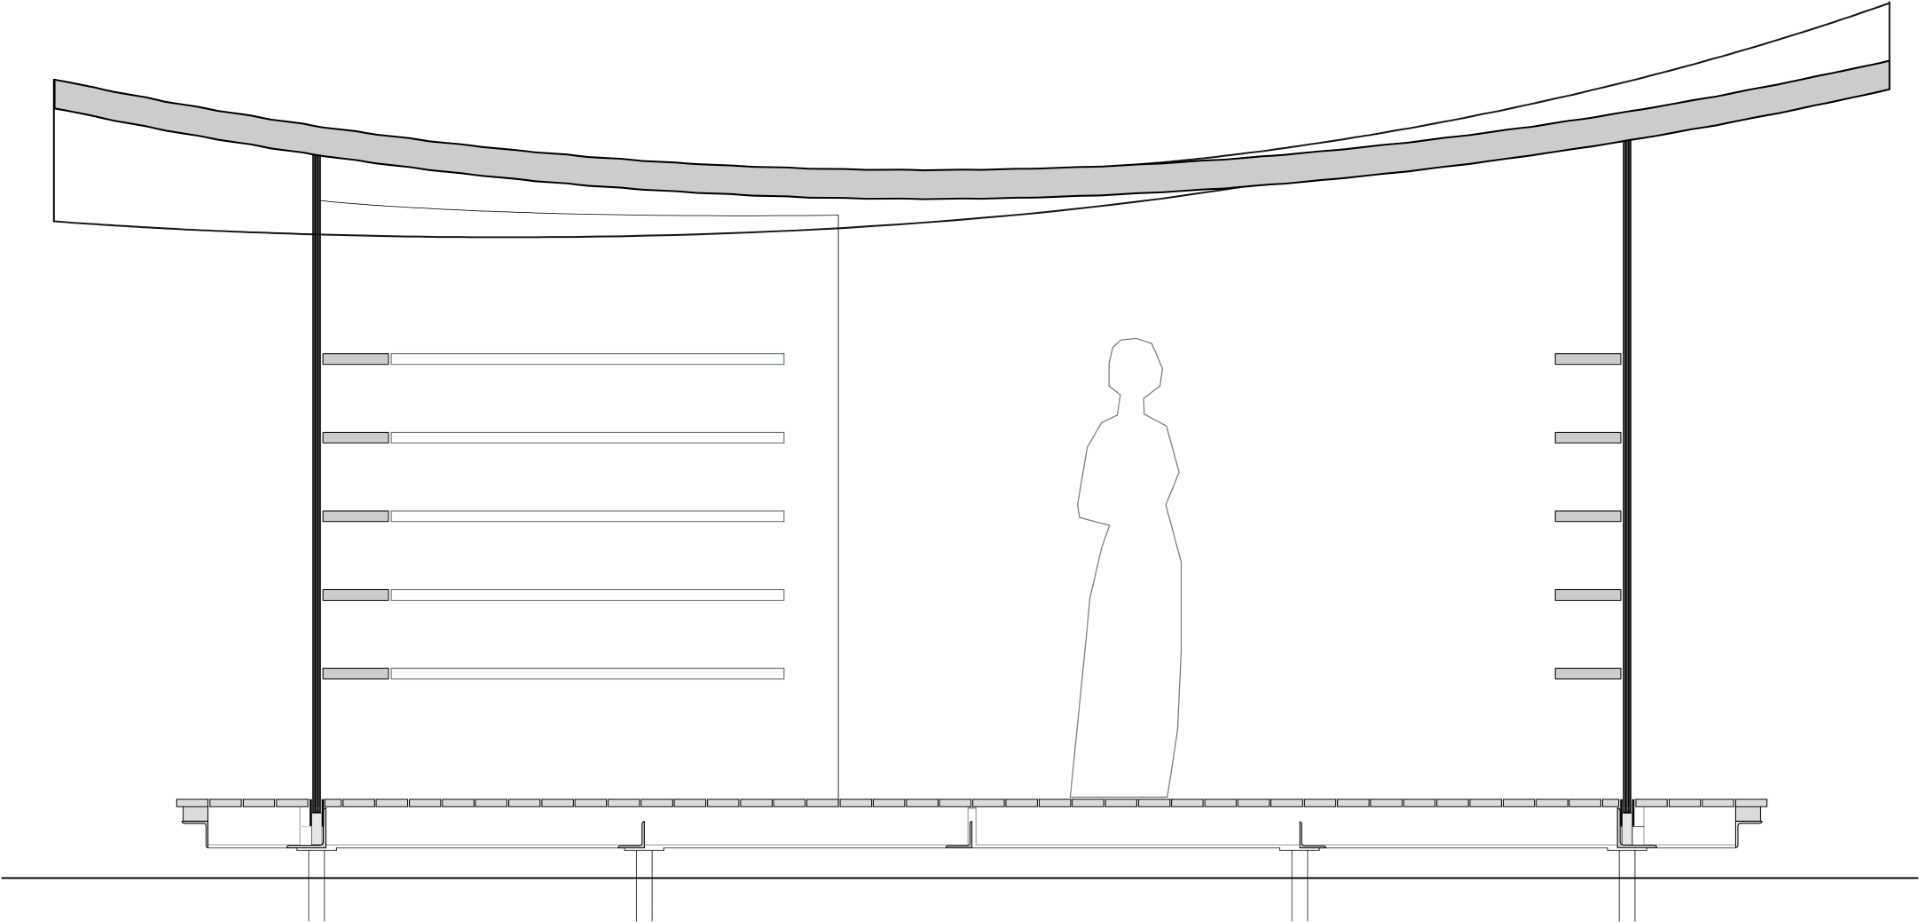 Architectural drawings for a small public li،ry with gl، walls and a white roof that's inspired by a sheet of paper.